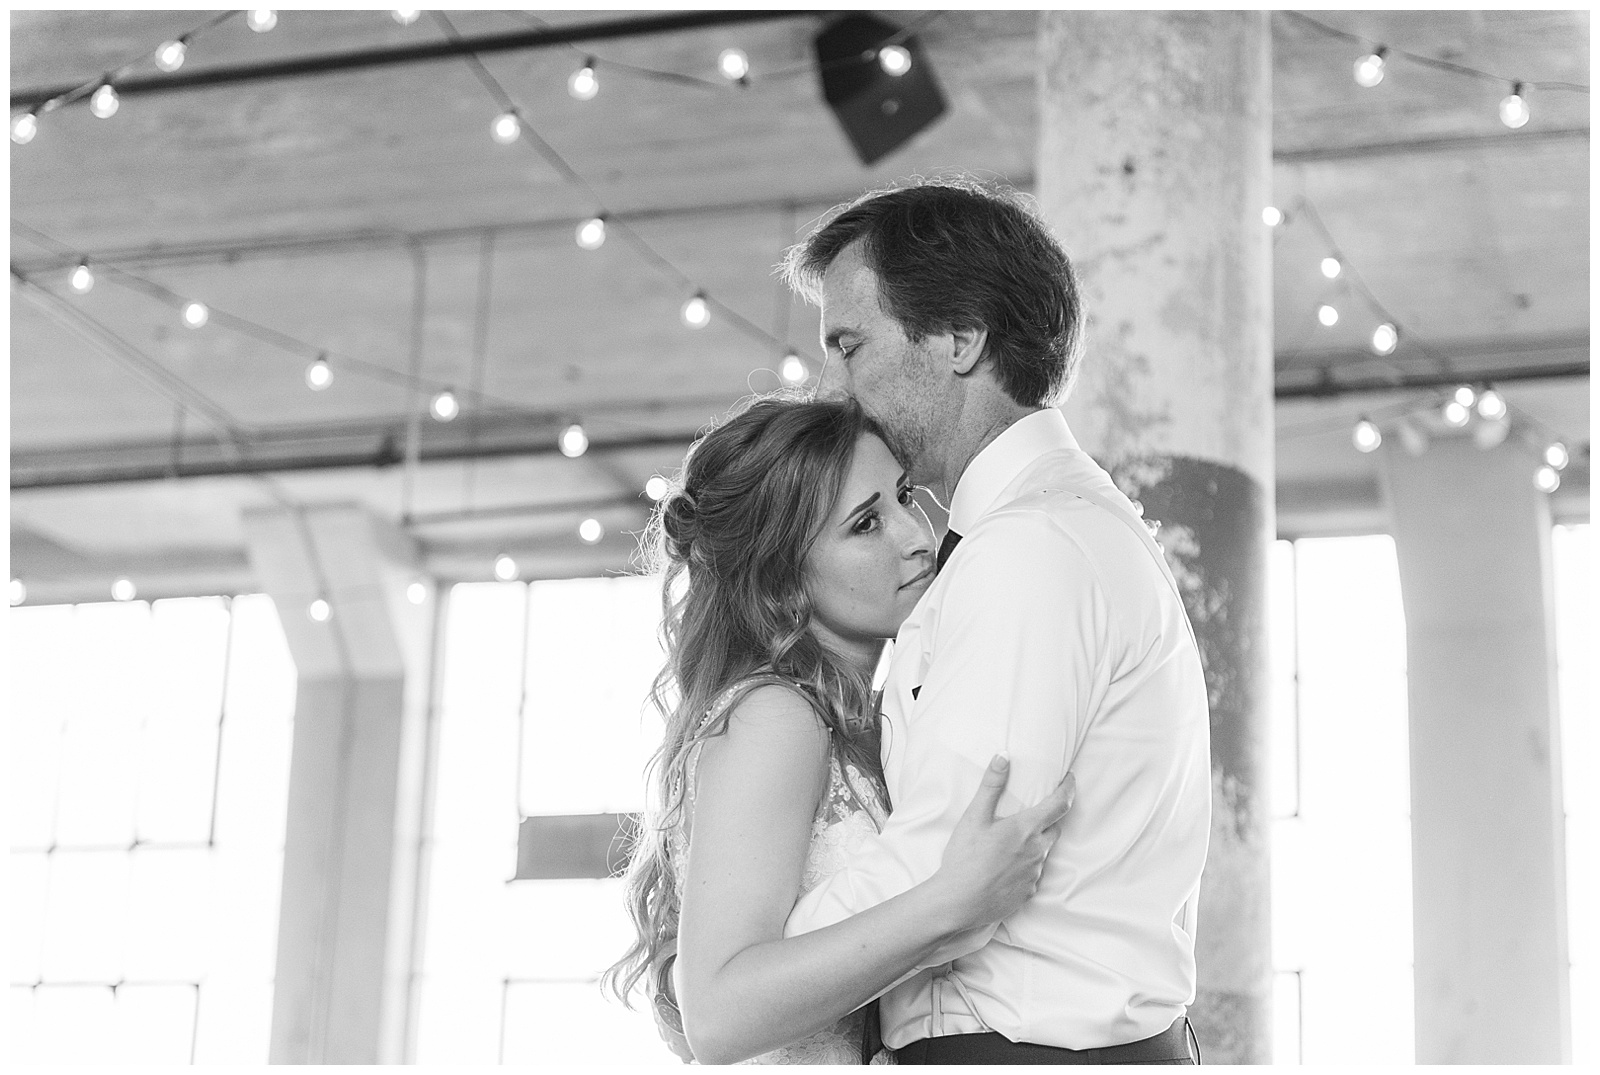 Emotional Bride and Dad Father-Daughter dance at Rustic Airy Indoor Wedding Venue with fairy lights in Elegant Modern Summer Wedding in Charlotte, NC | check out the full wedding at KevynDixonPhoto.com